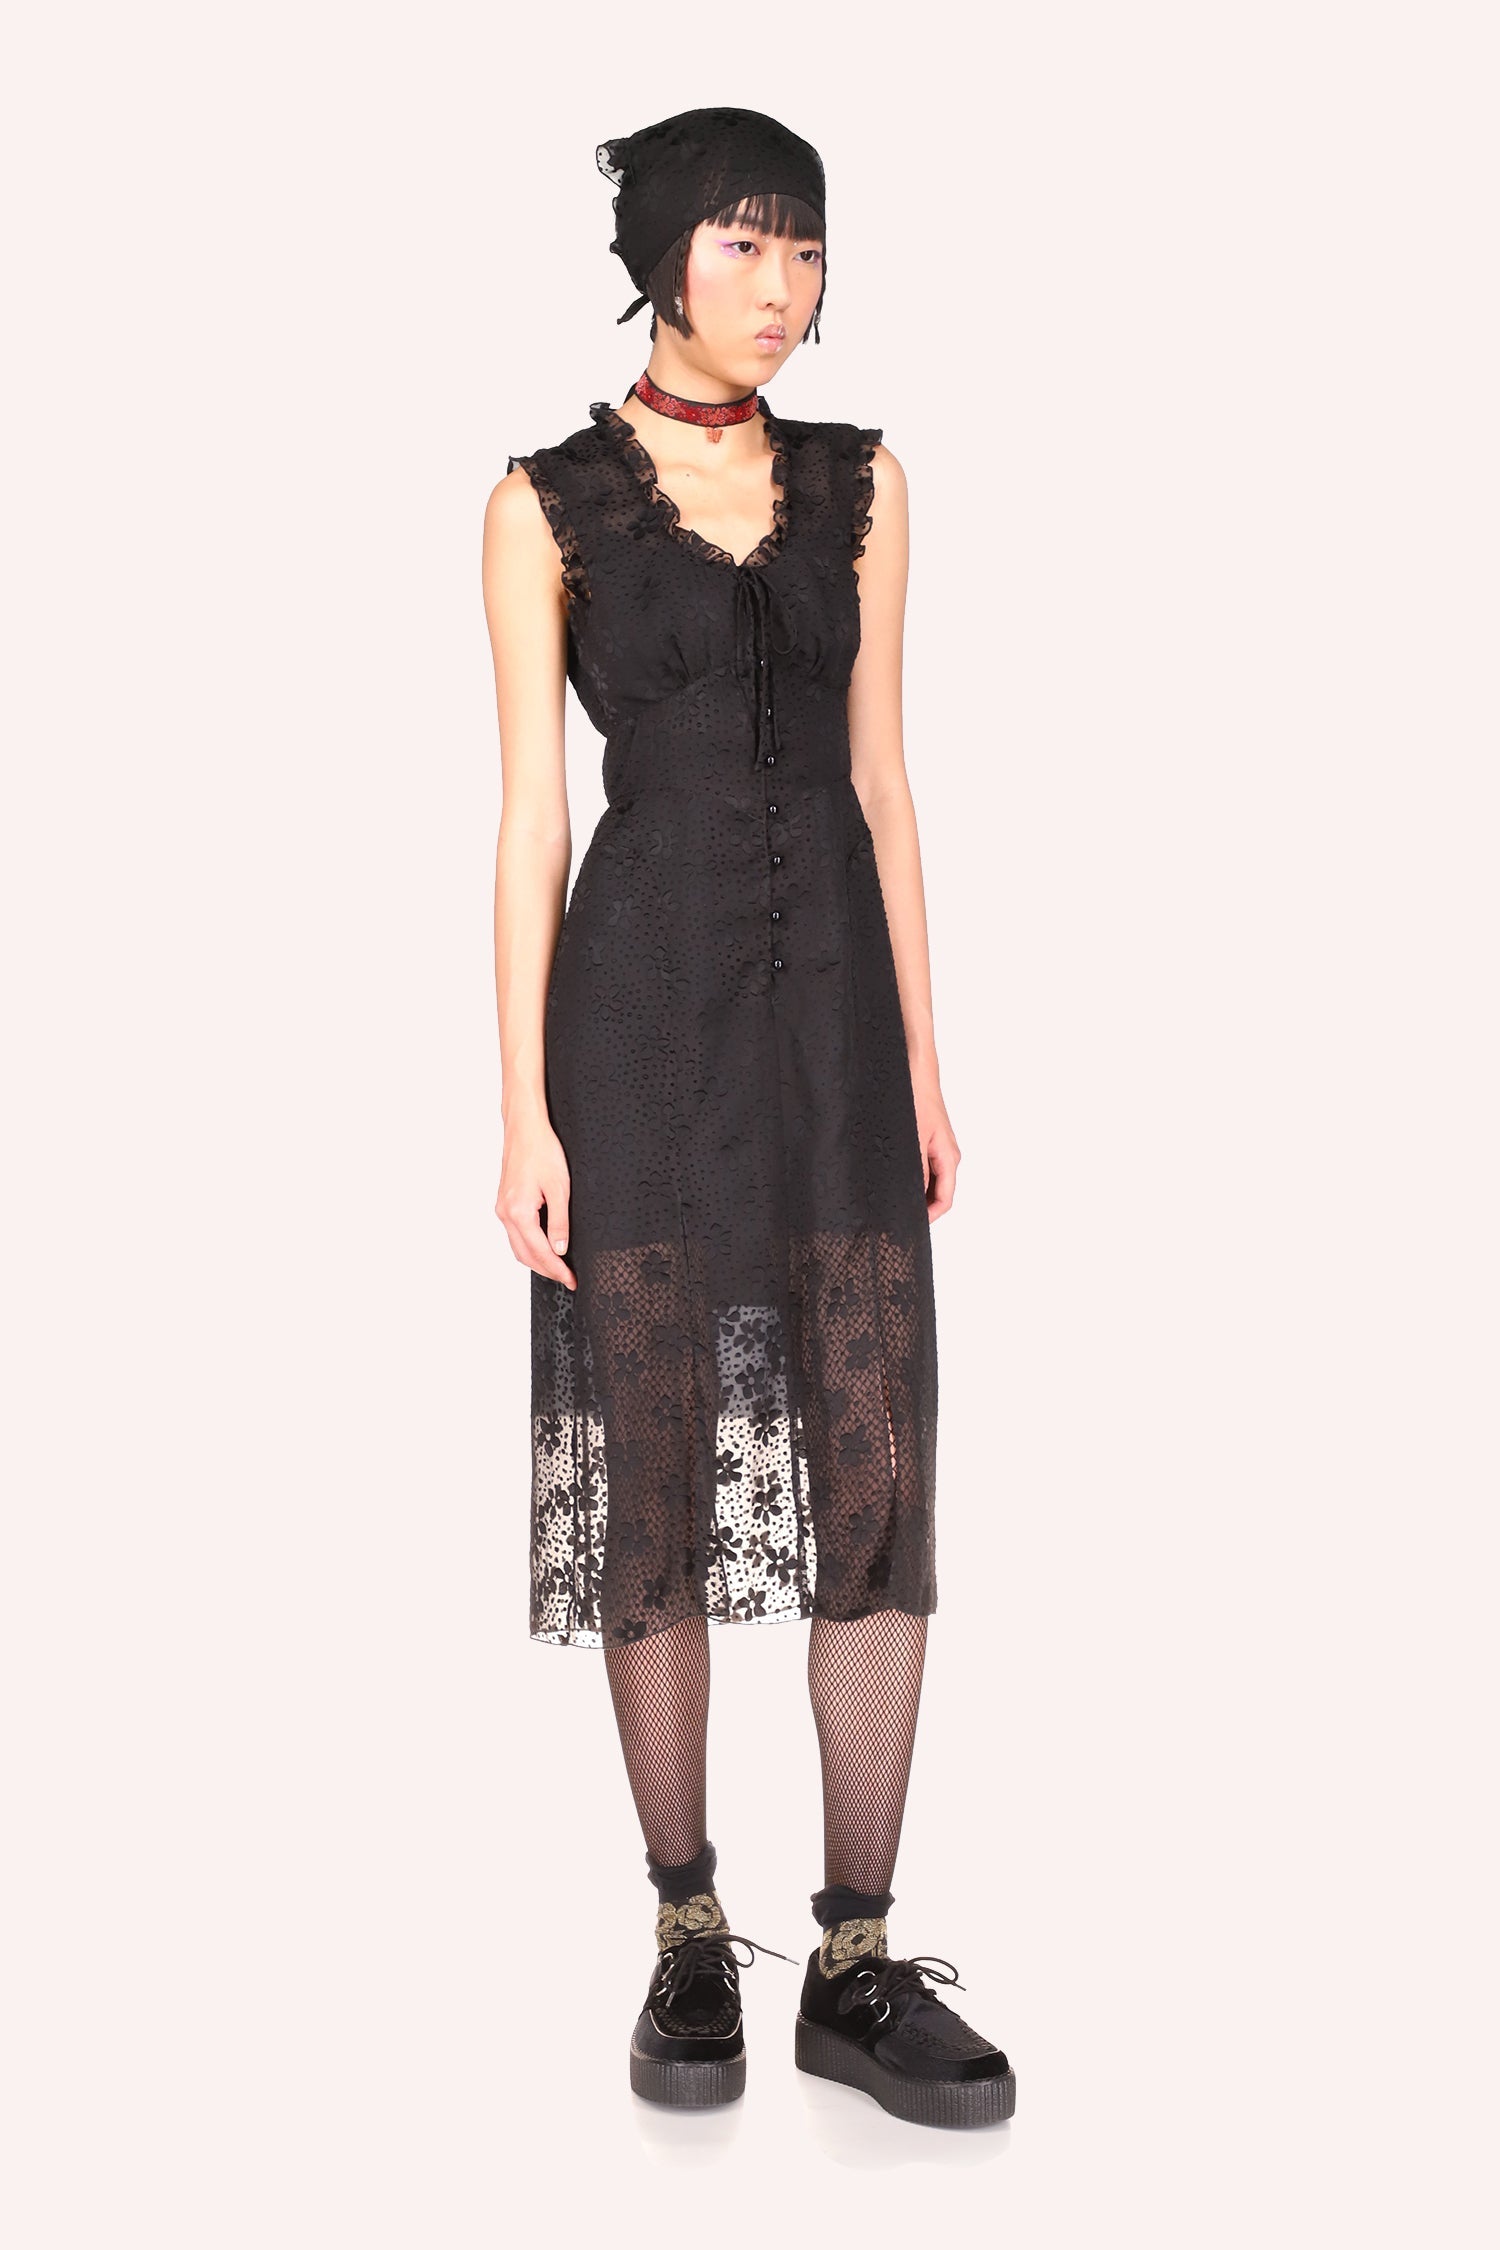 Daisy Dot Burnout Dress Black form-fitting dress with tulle effect on the legs and a small opening on the thighs